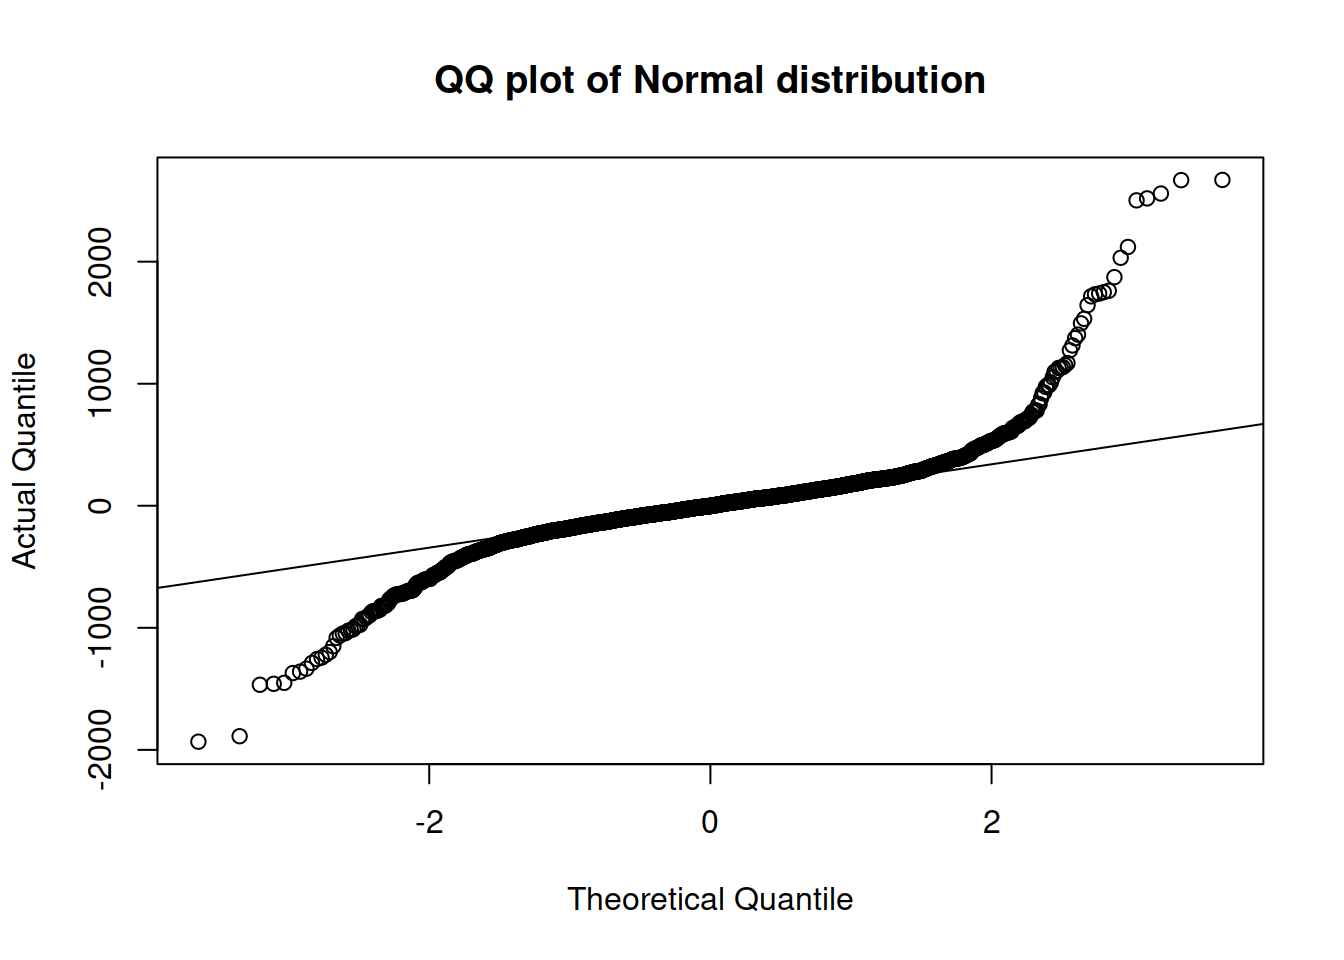 QQ plot of the ARIMA model with Normal distribution.